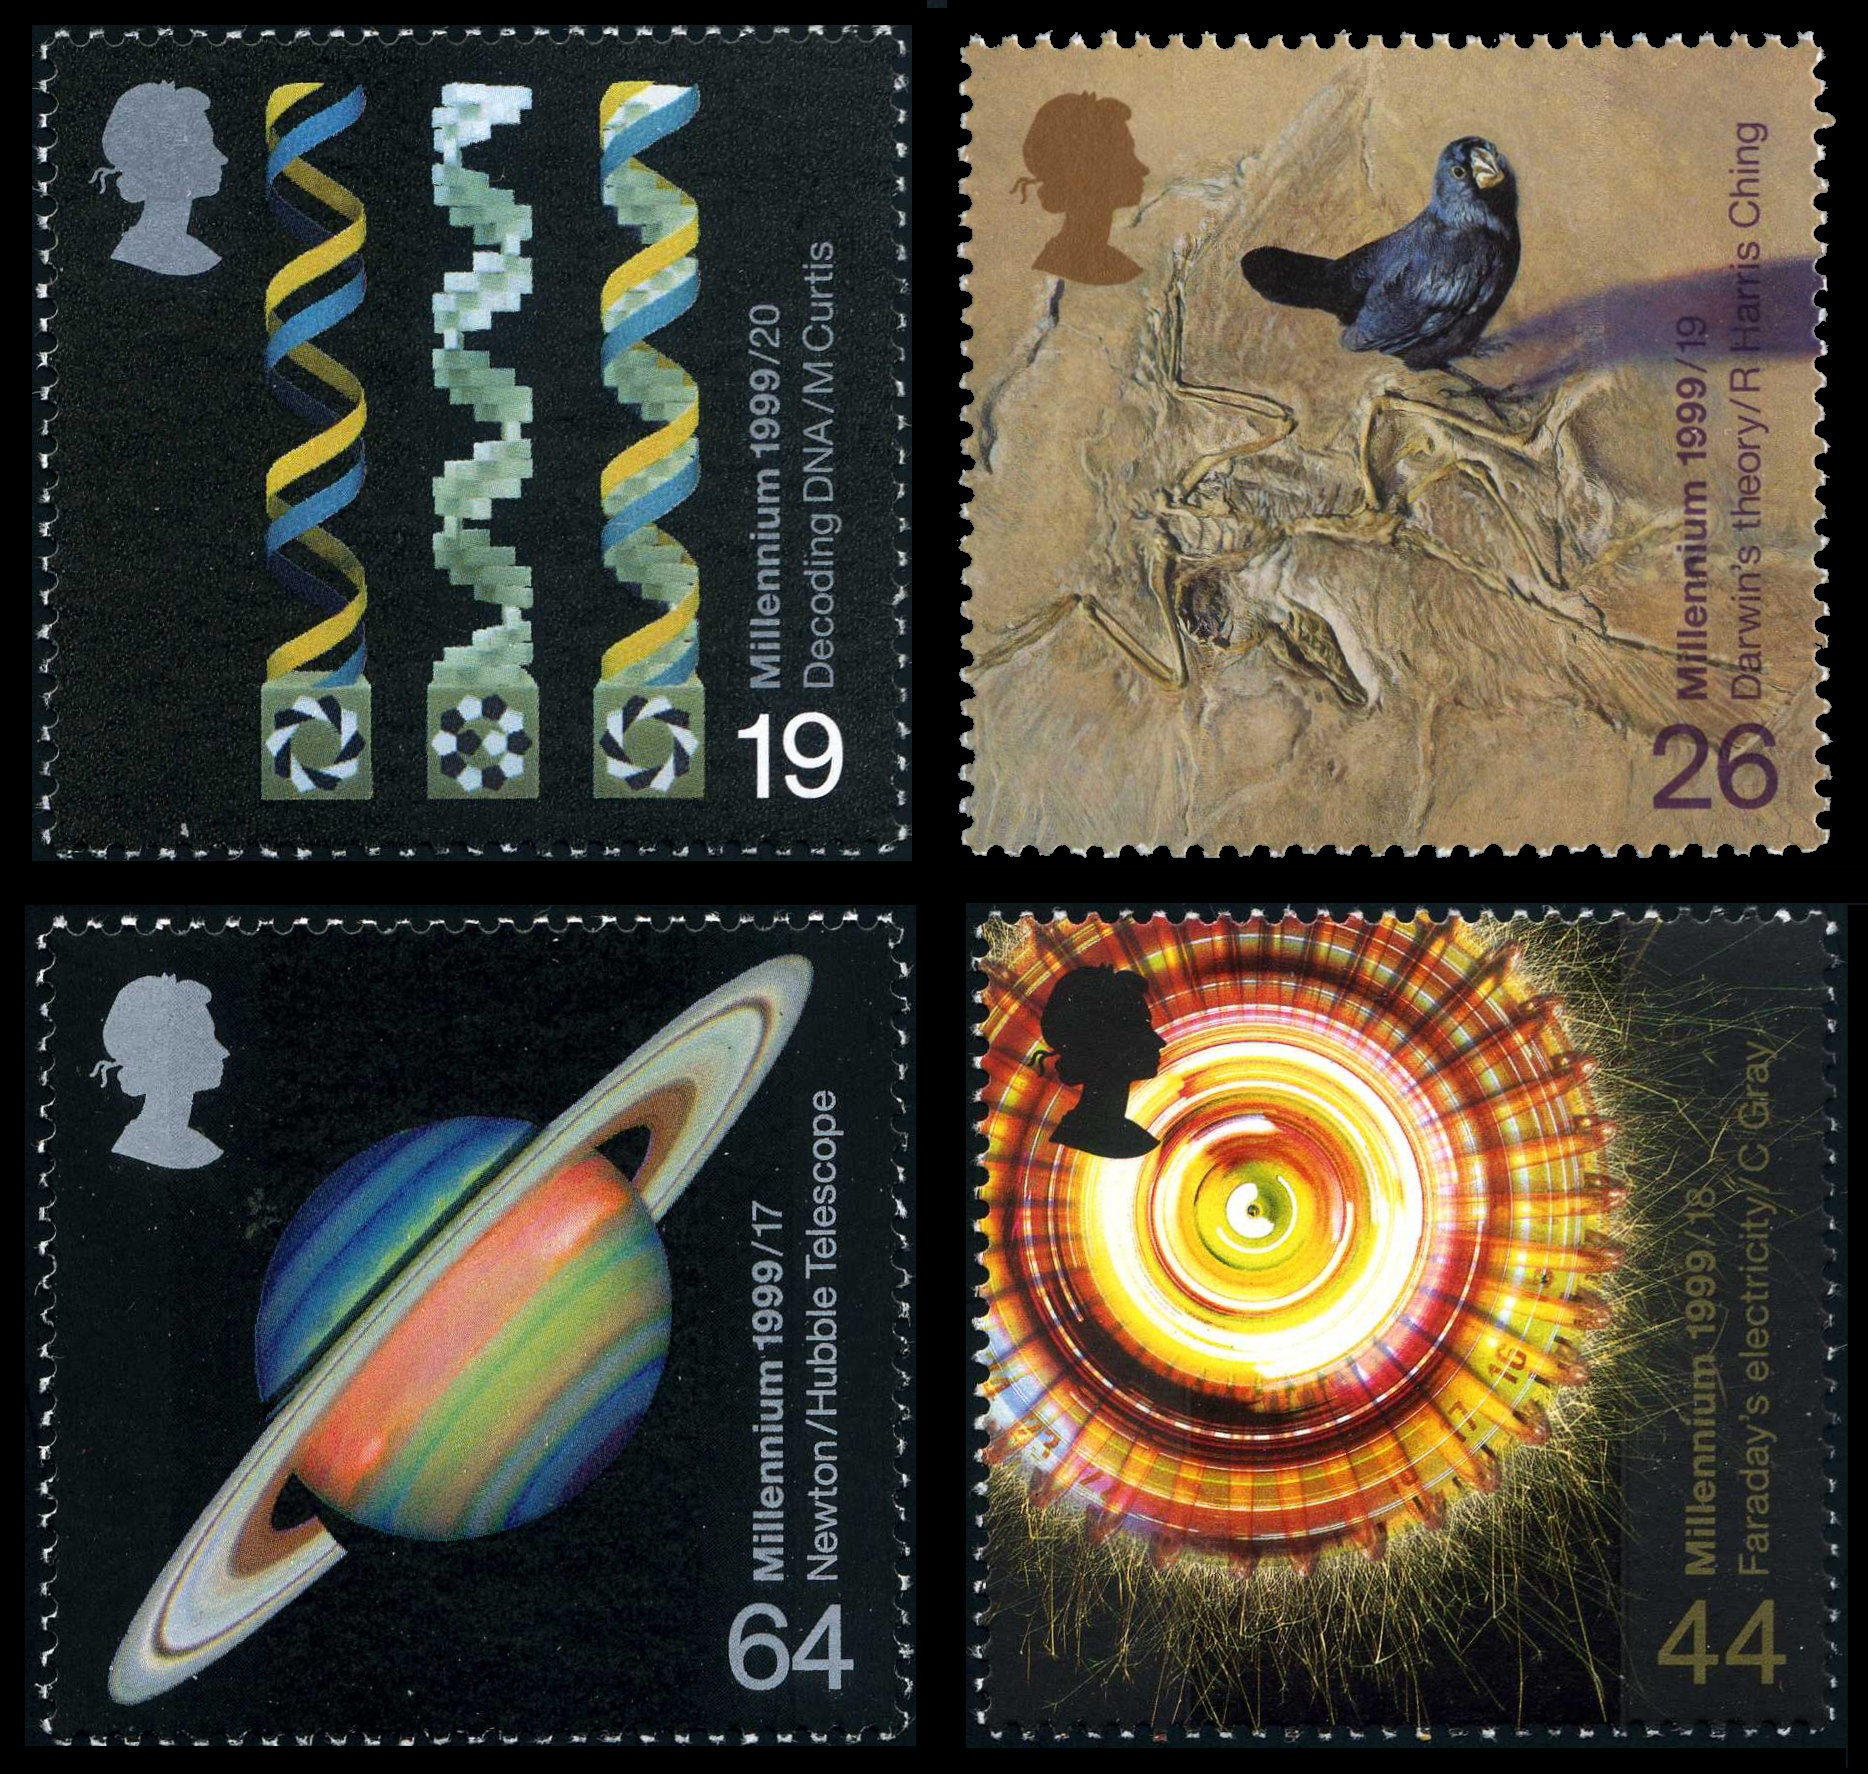 1999 Royal Mail Scientists' Tale stamp set